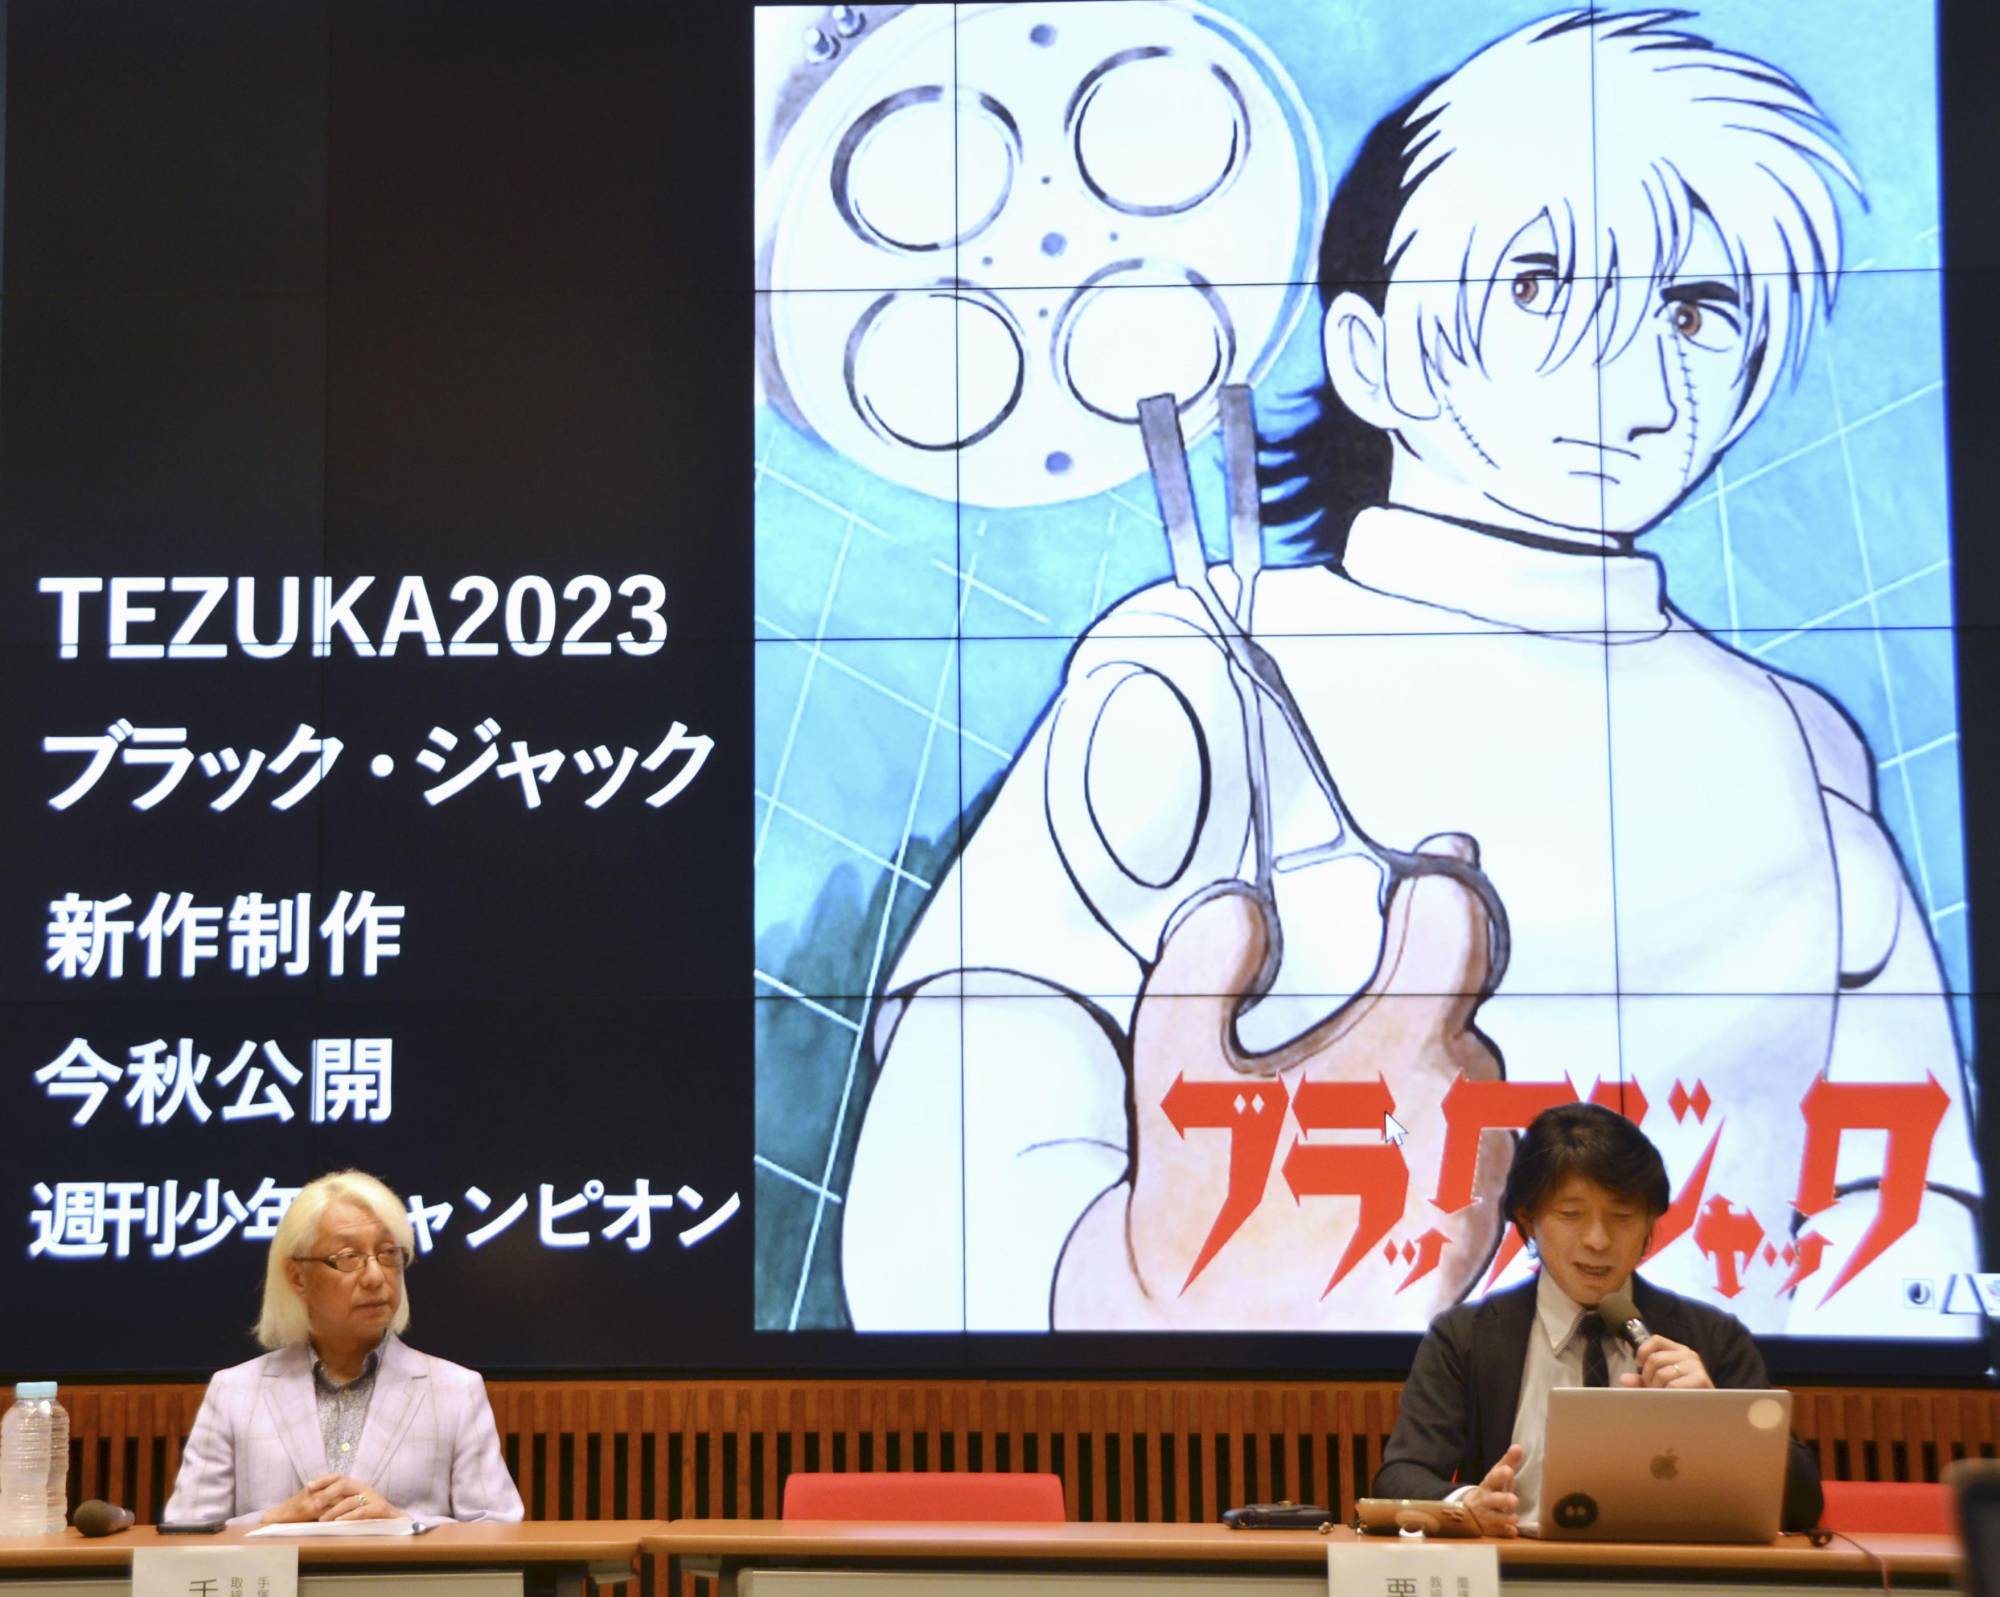 Members of the Tezuka 2023 project at a news conference about a new episode of the famous Osamu Tezuka manga 'Black Jack' created with the help of artificial intelligence, in Tokyo on Monday | KYODO